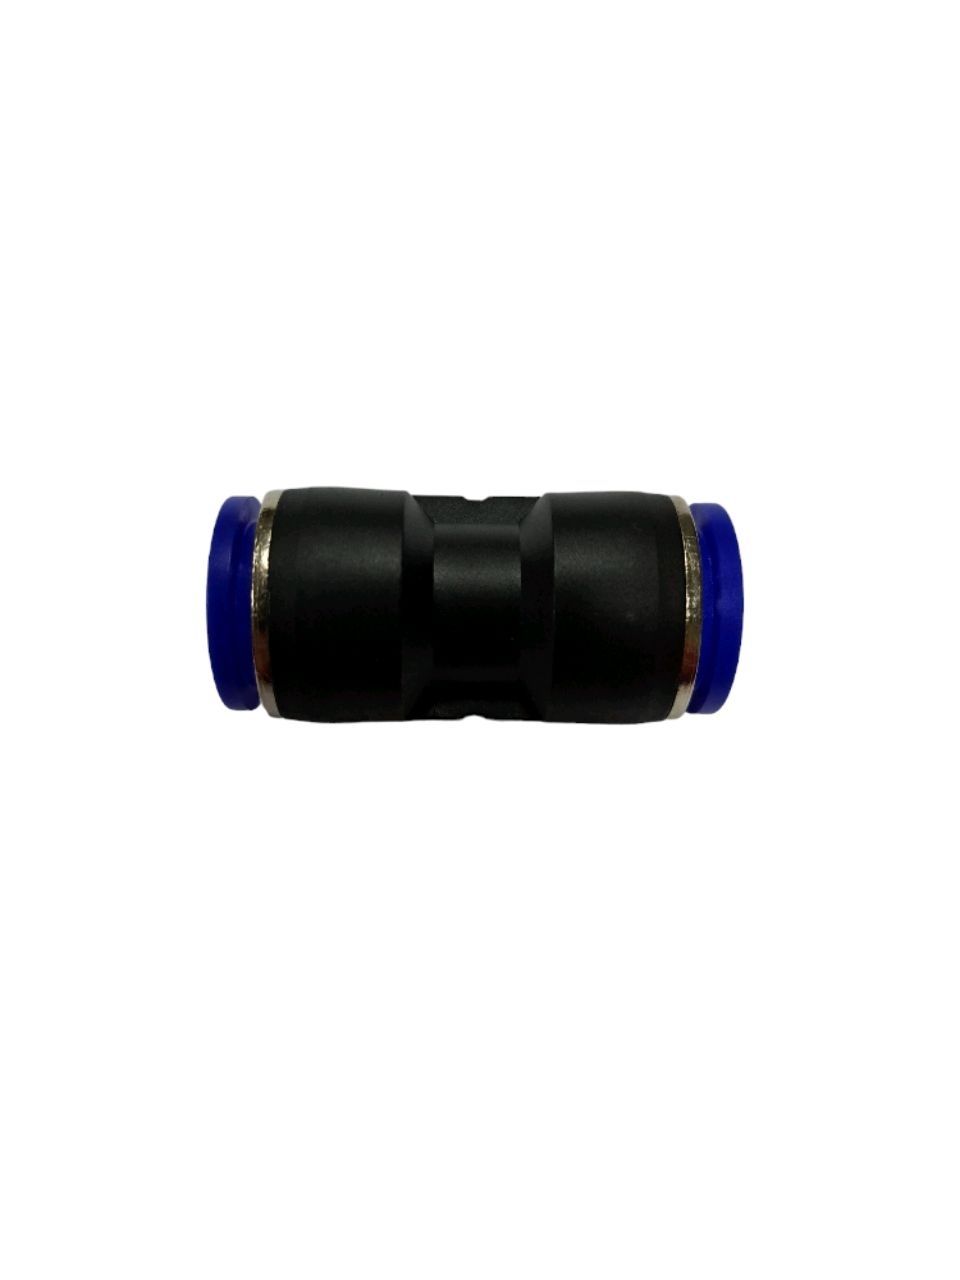 Fiting plastic (14mm)